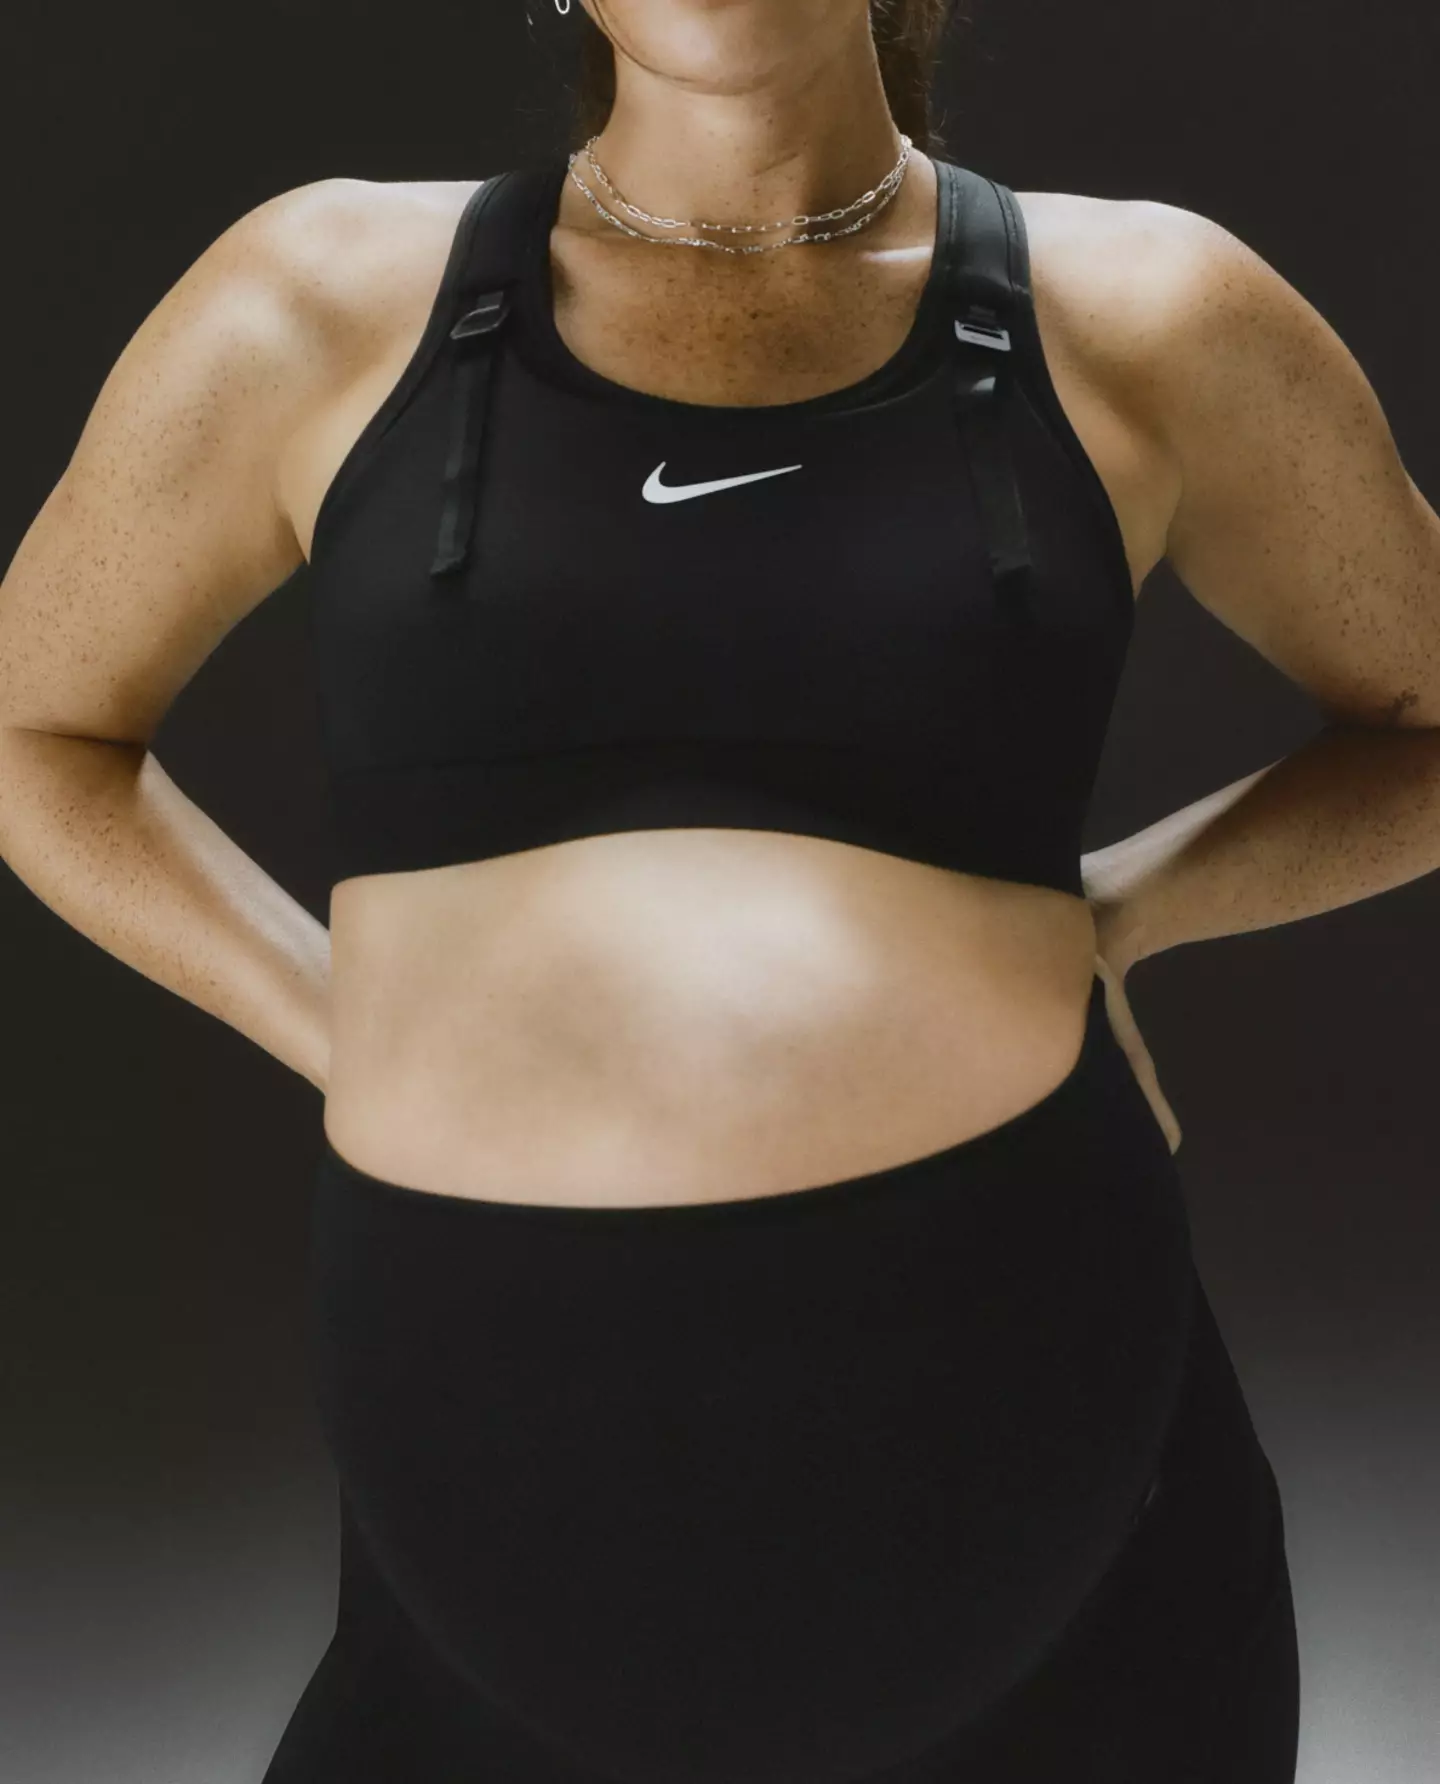 The new sportsbra from Nike has been designed with women in mind.